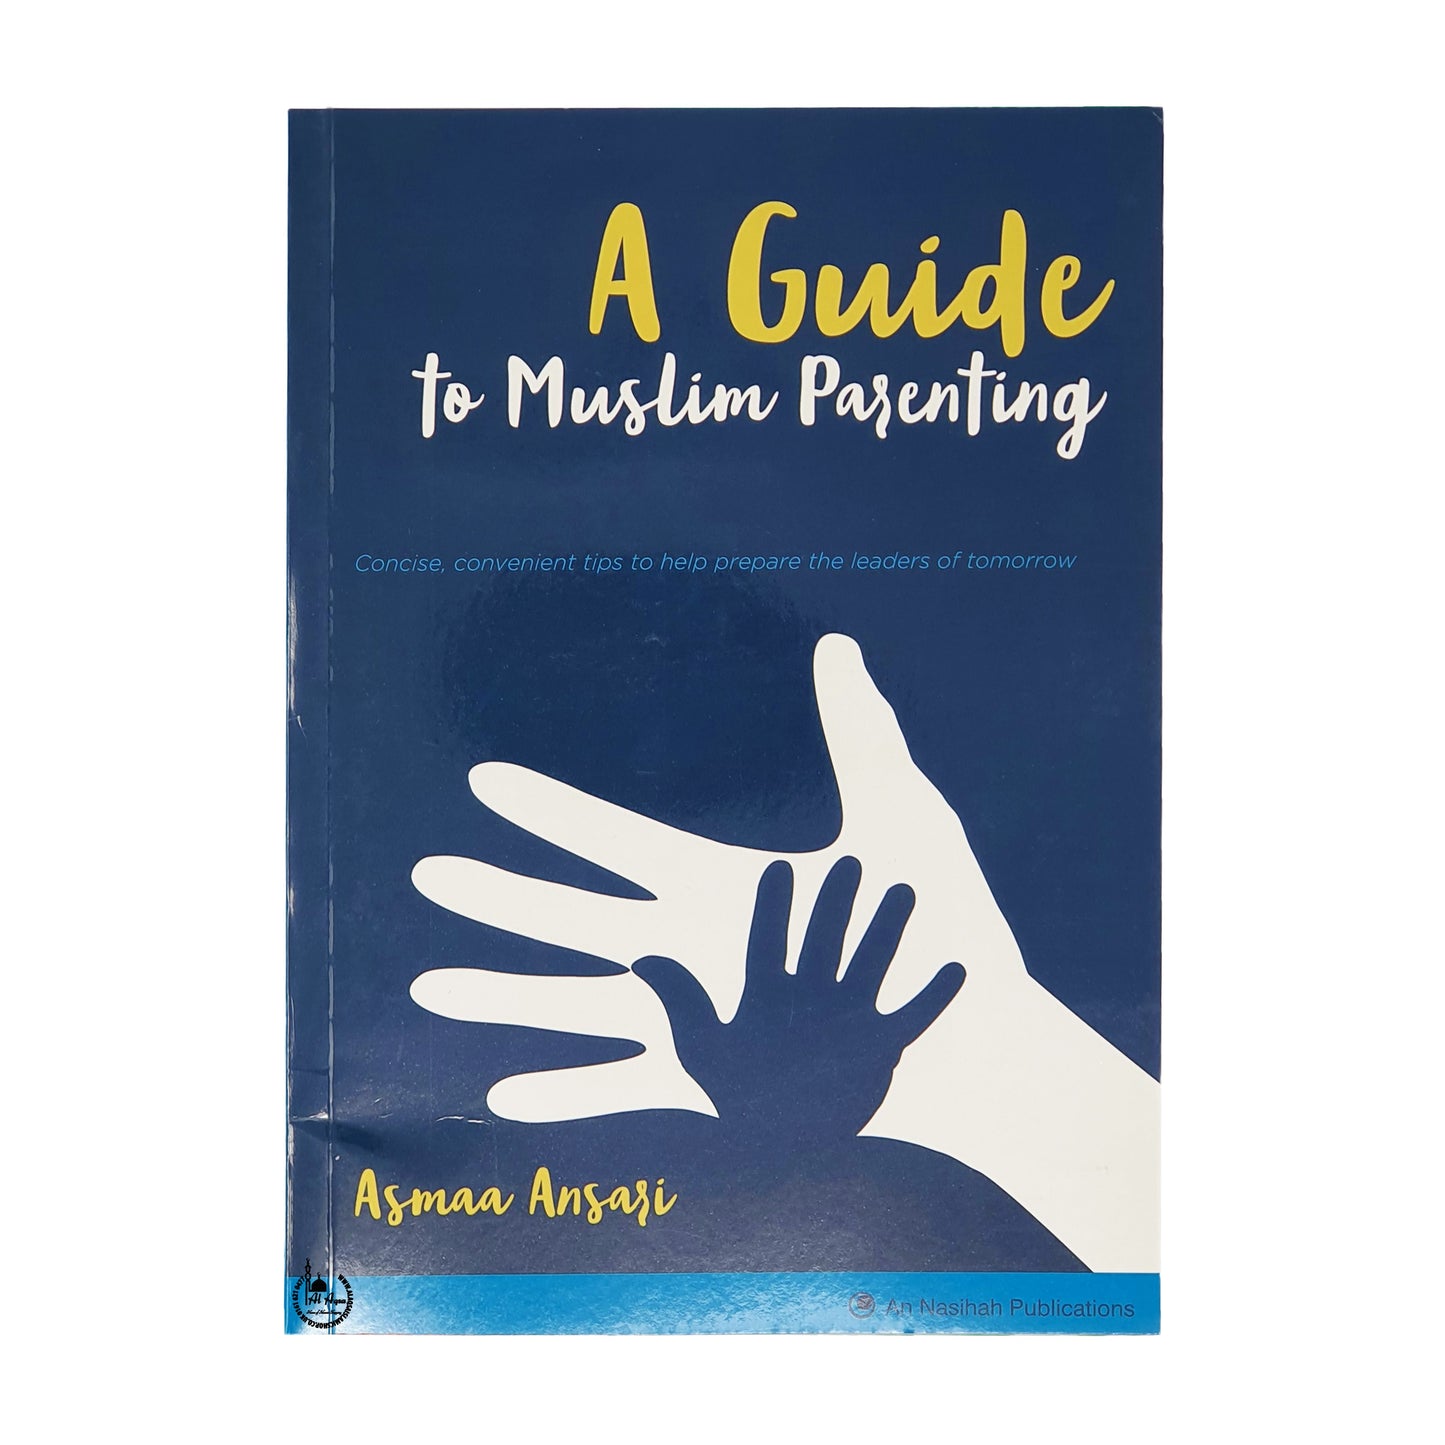 A Guide to Muslim Parenting